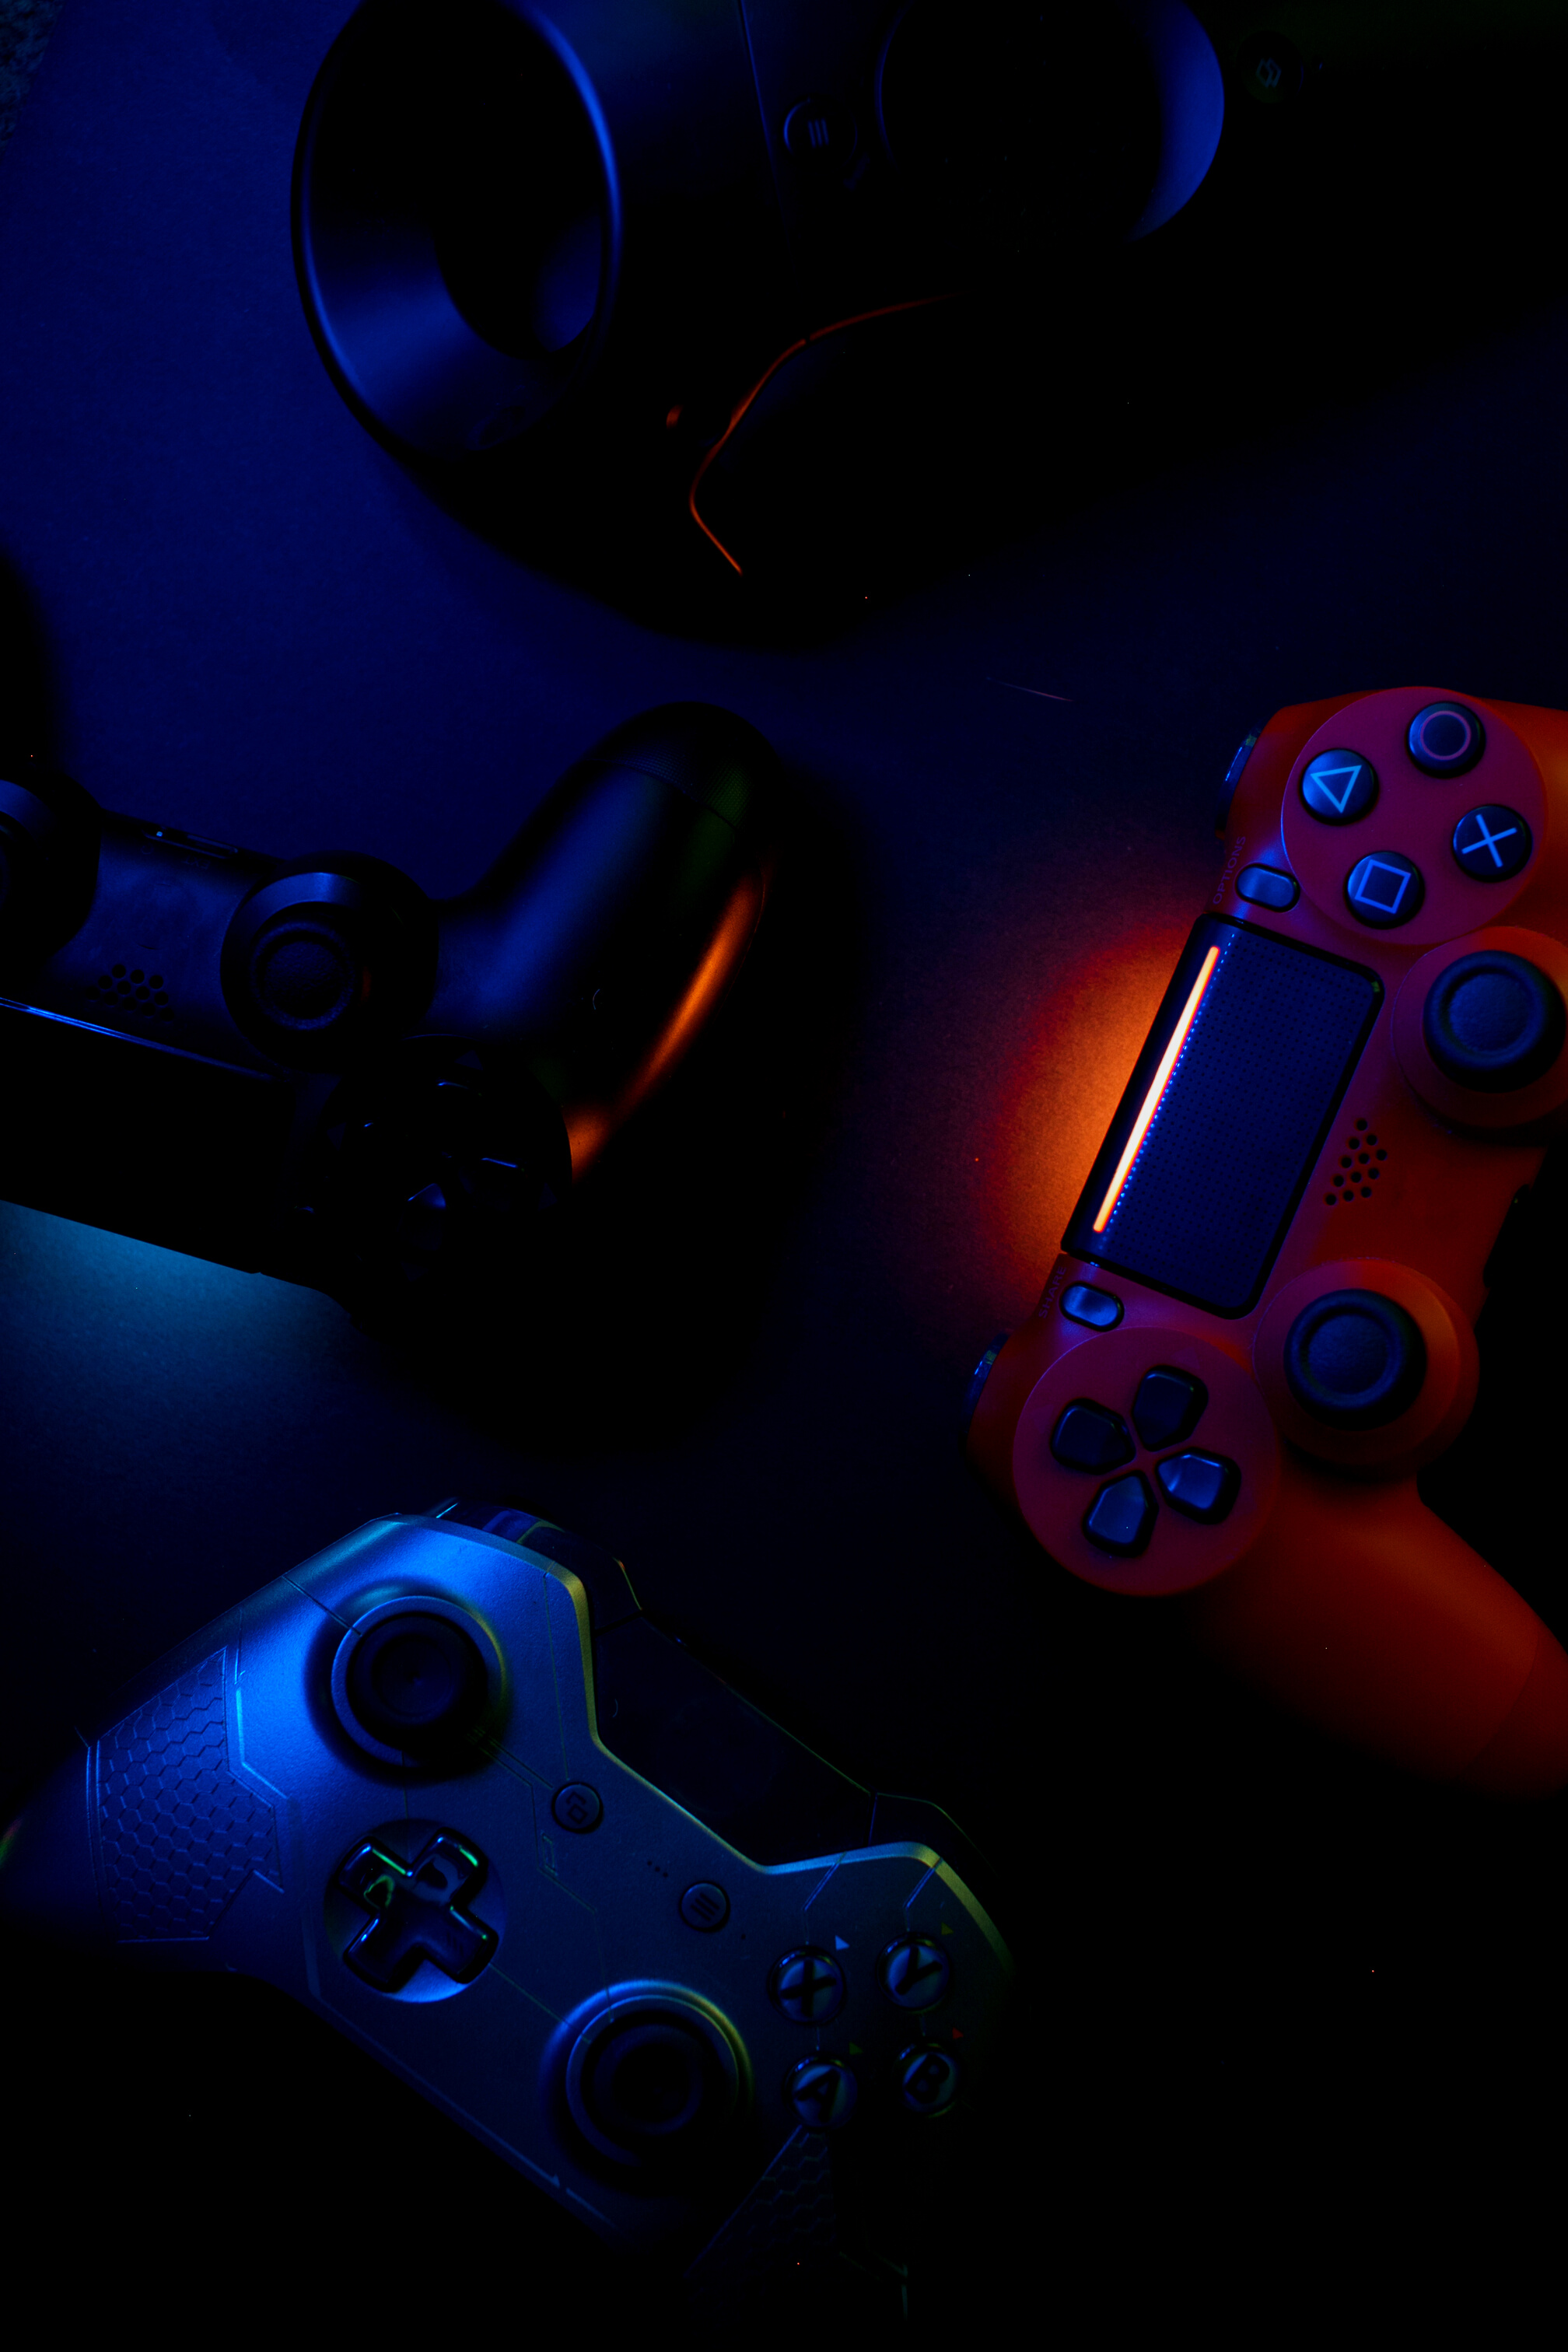 Game Console Device in the Dark 